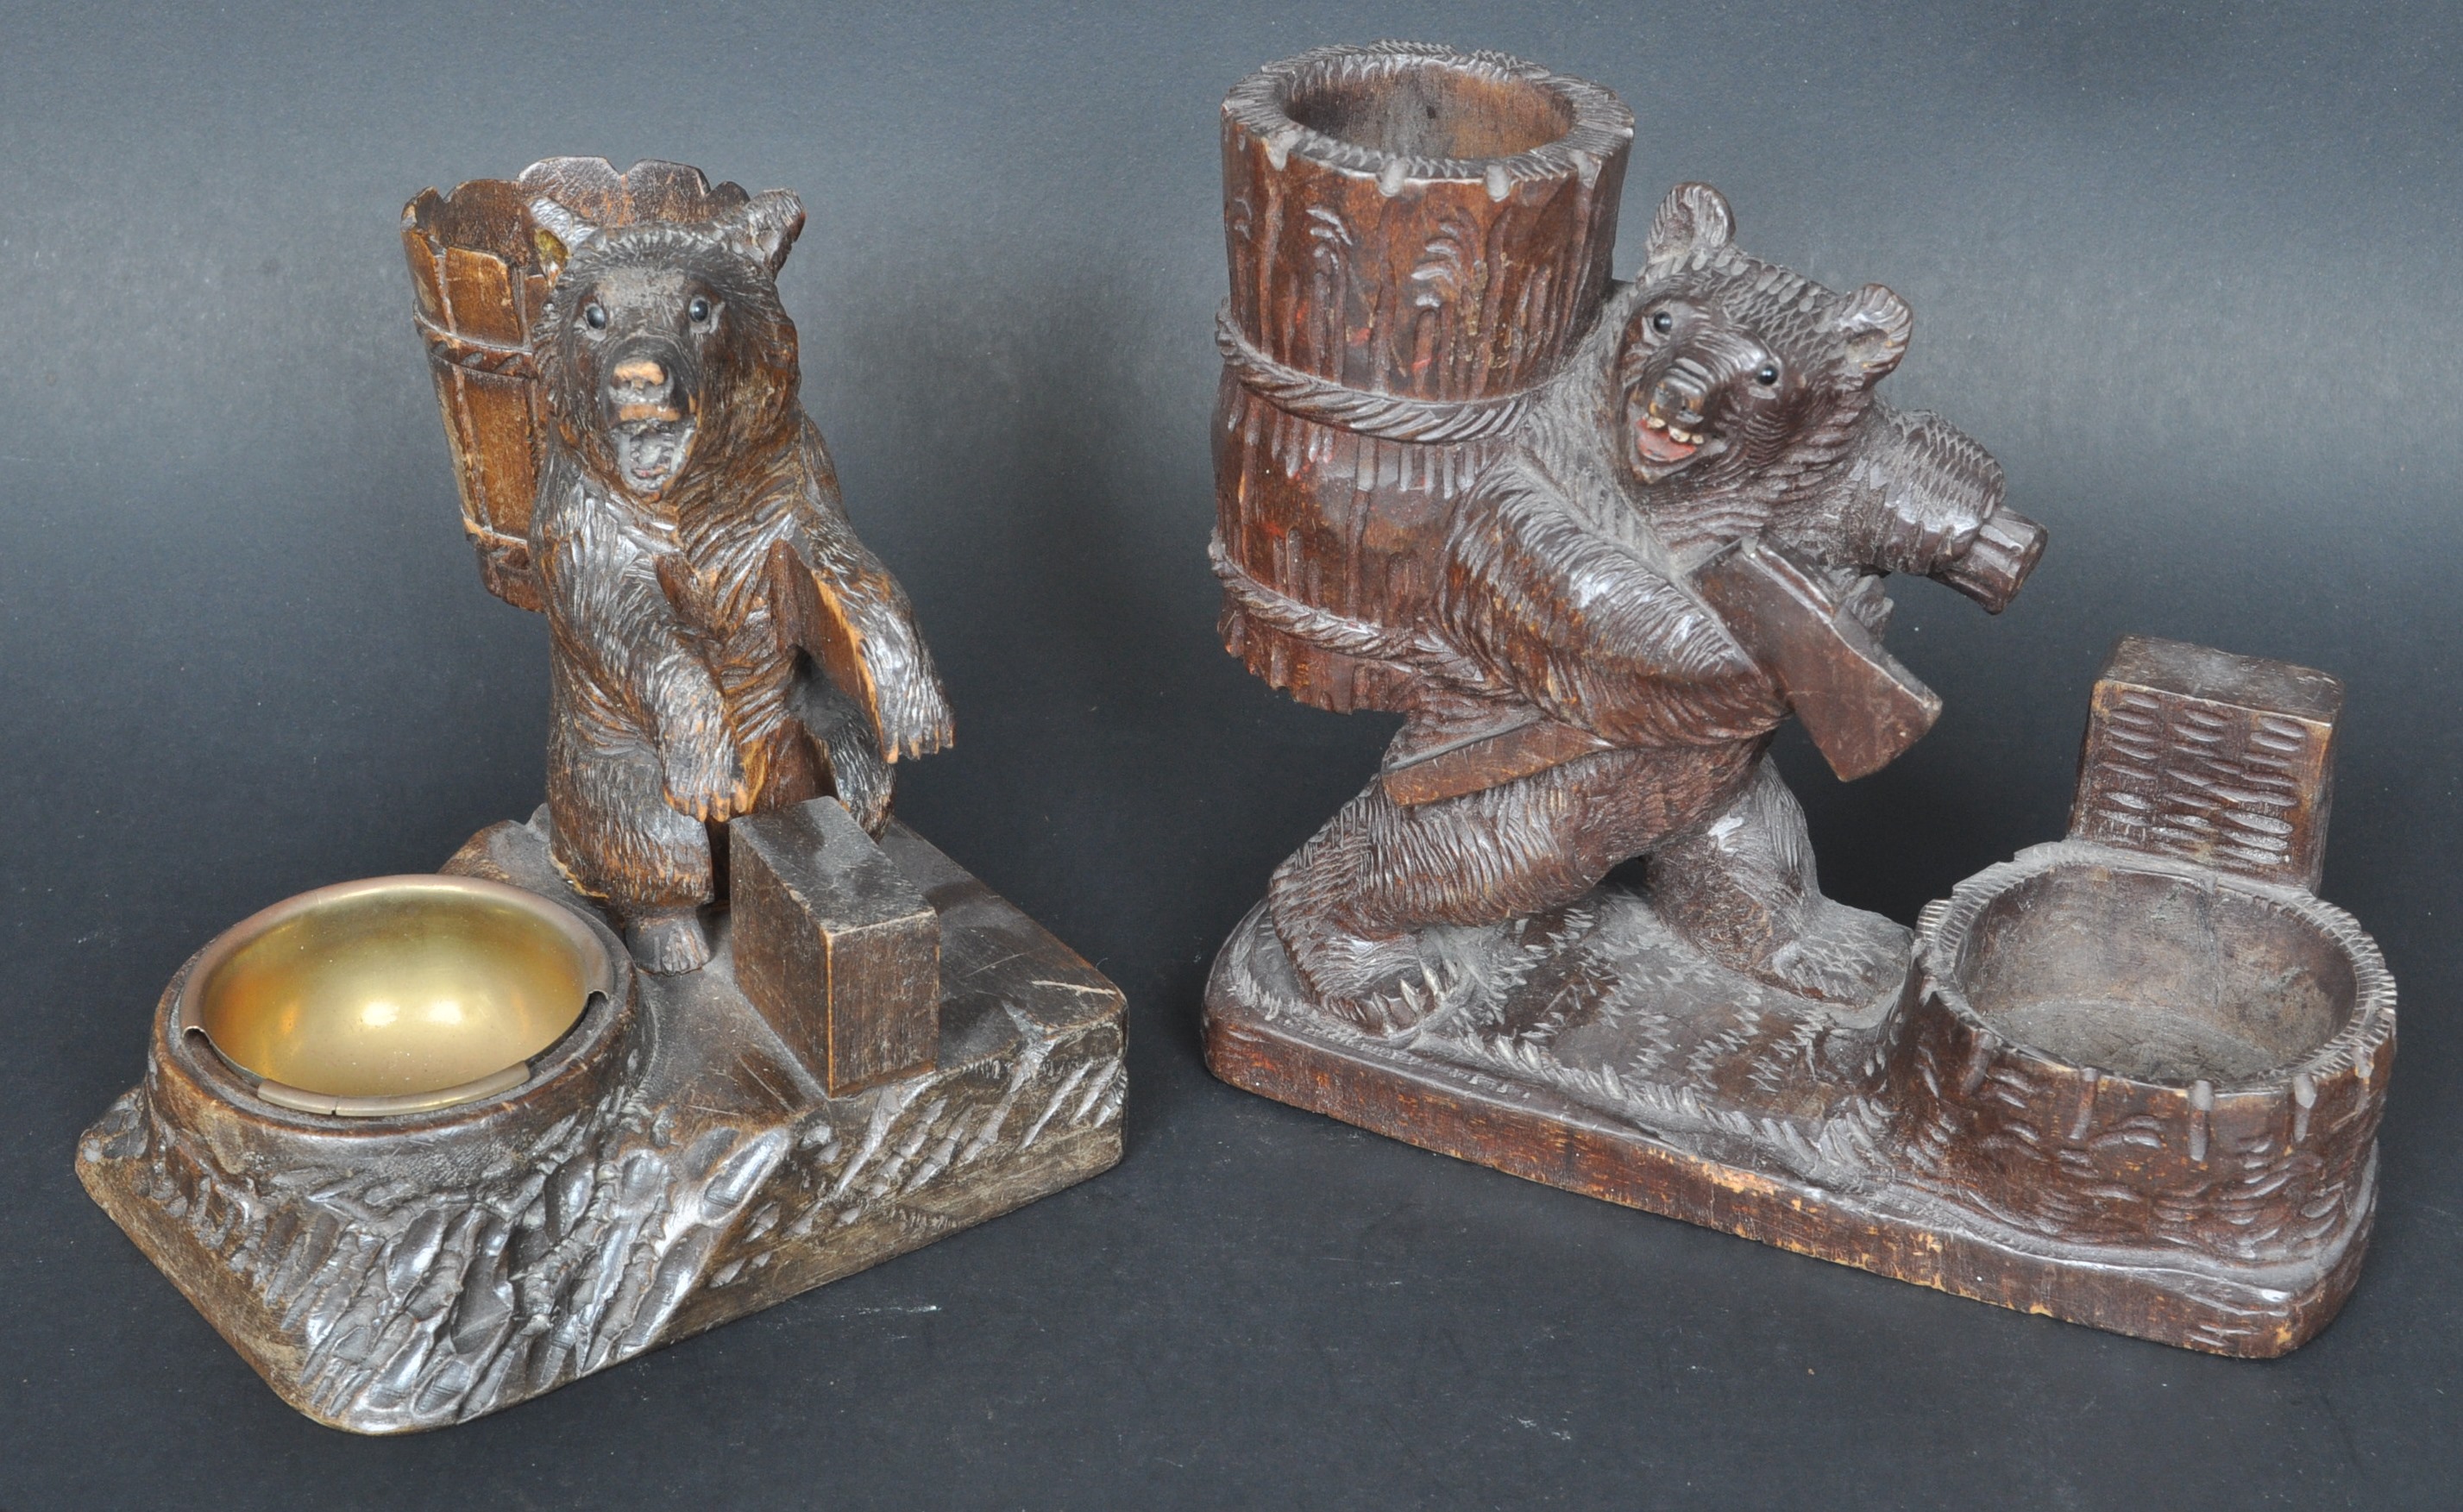 TWO 19TH CENTURY GERMAN CARVED BEAR MATCHBOX HOLDERS - Image 2 of 5